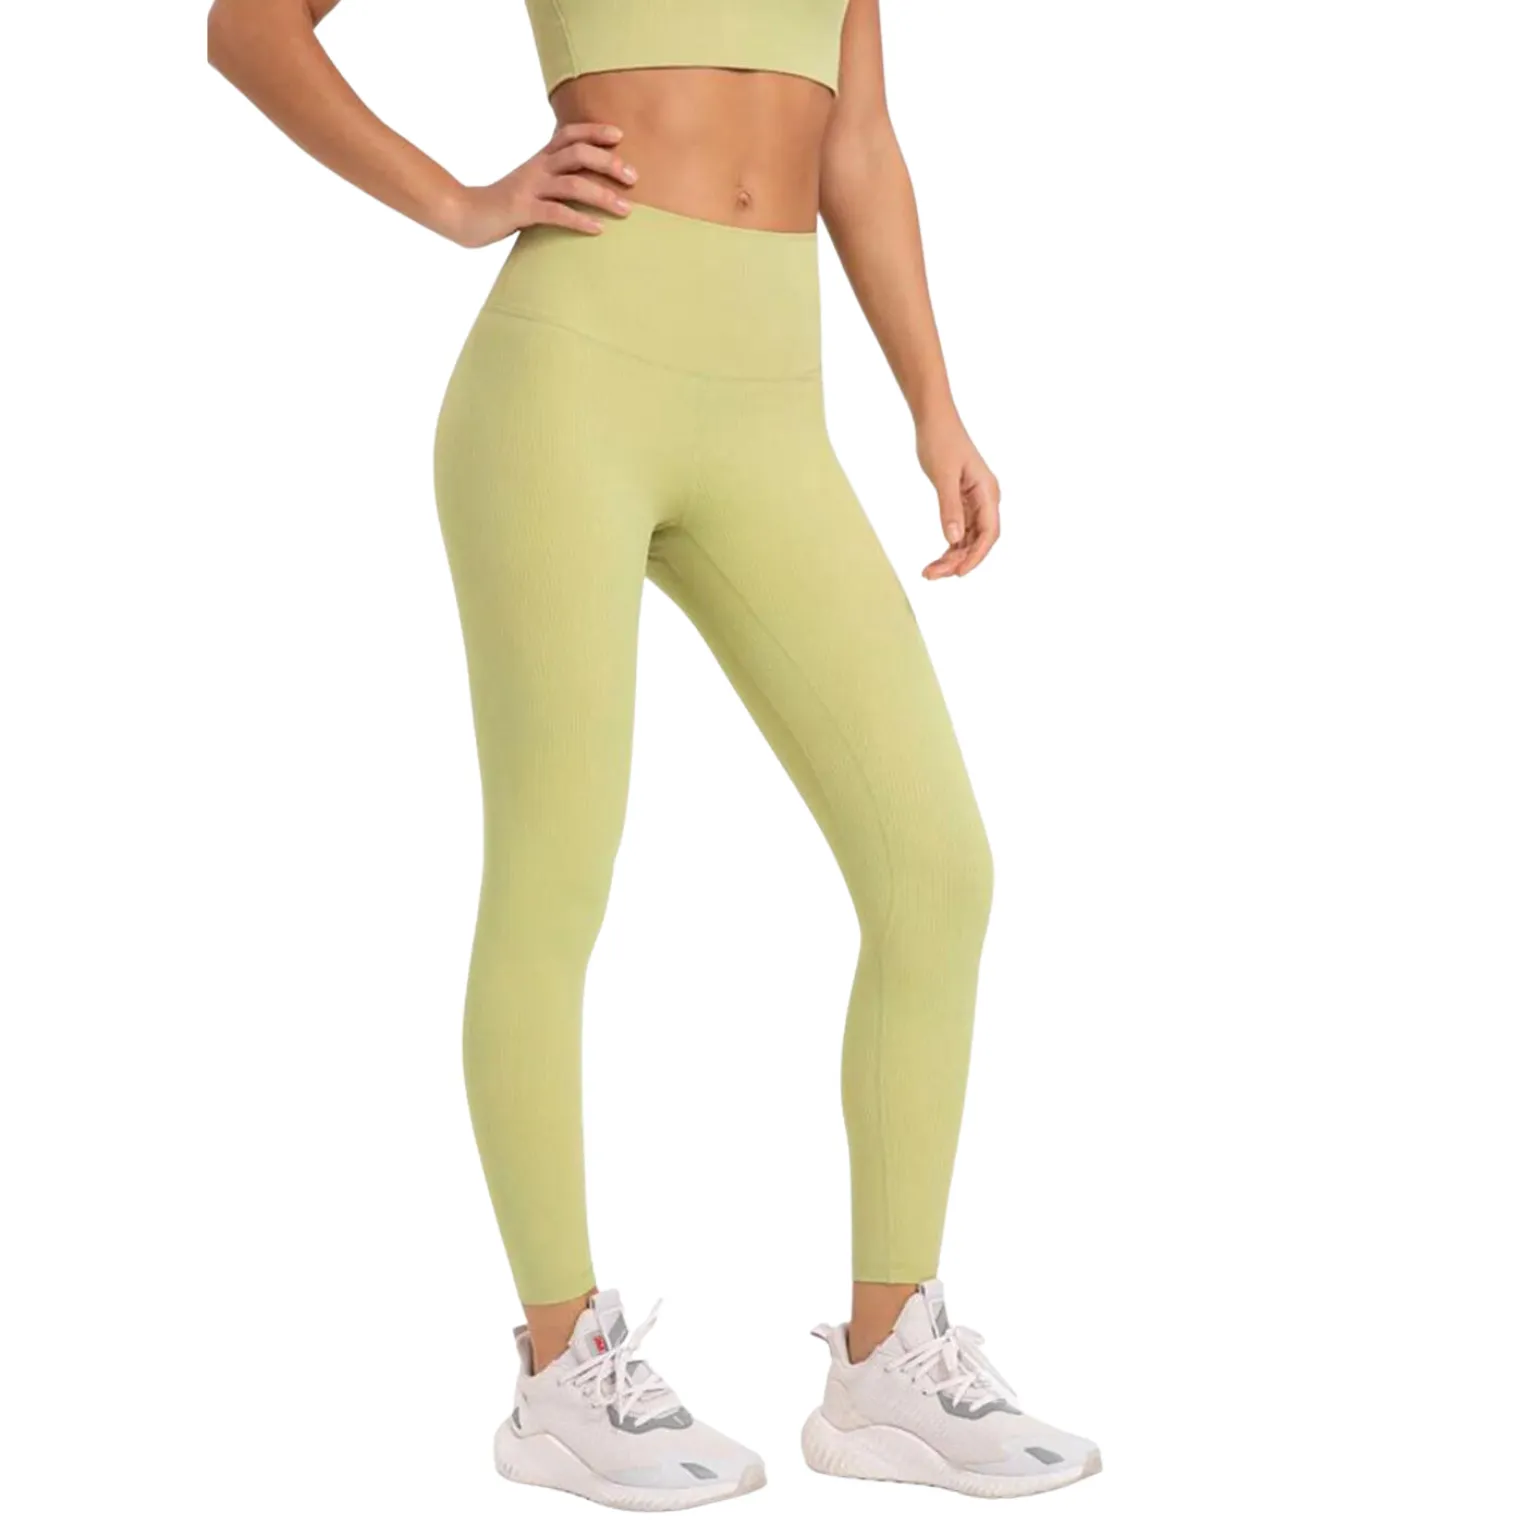 Slimming Leggings manufacturing with trendy design